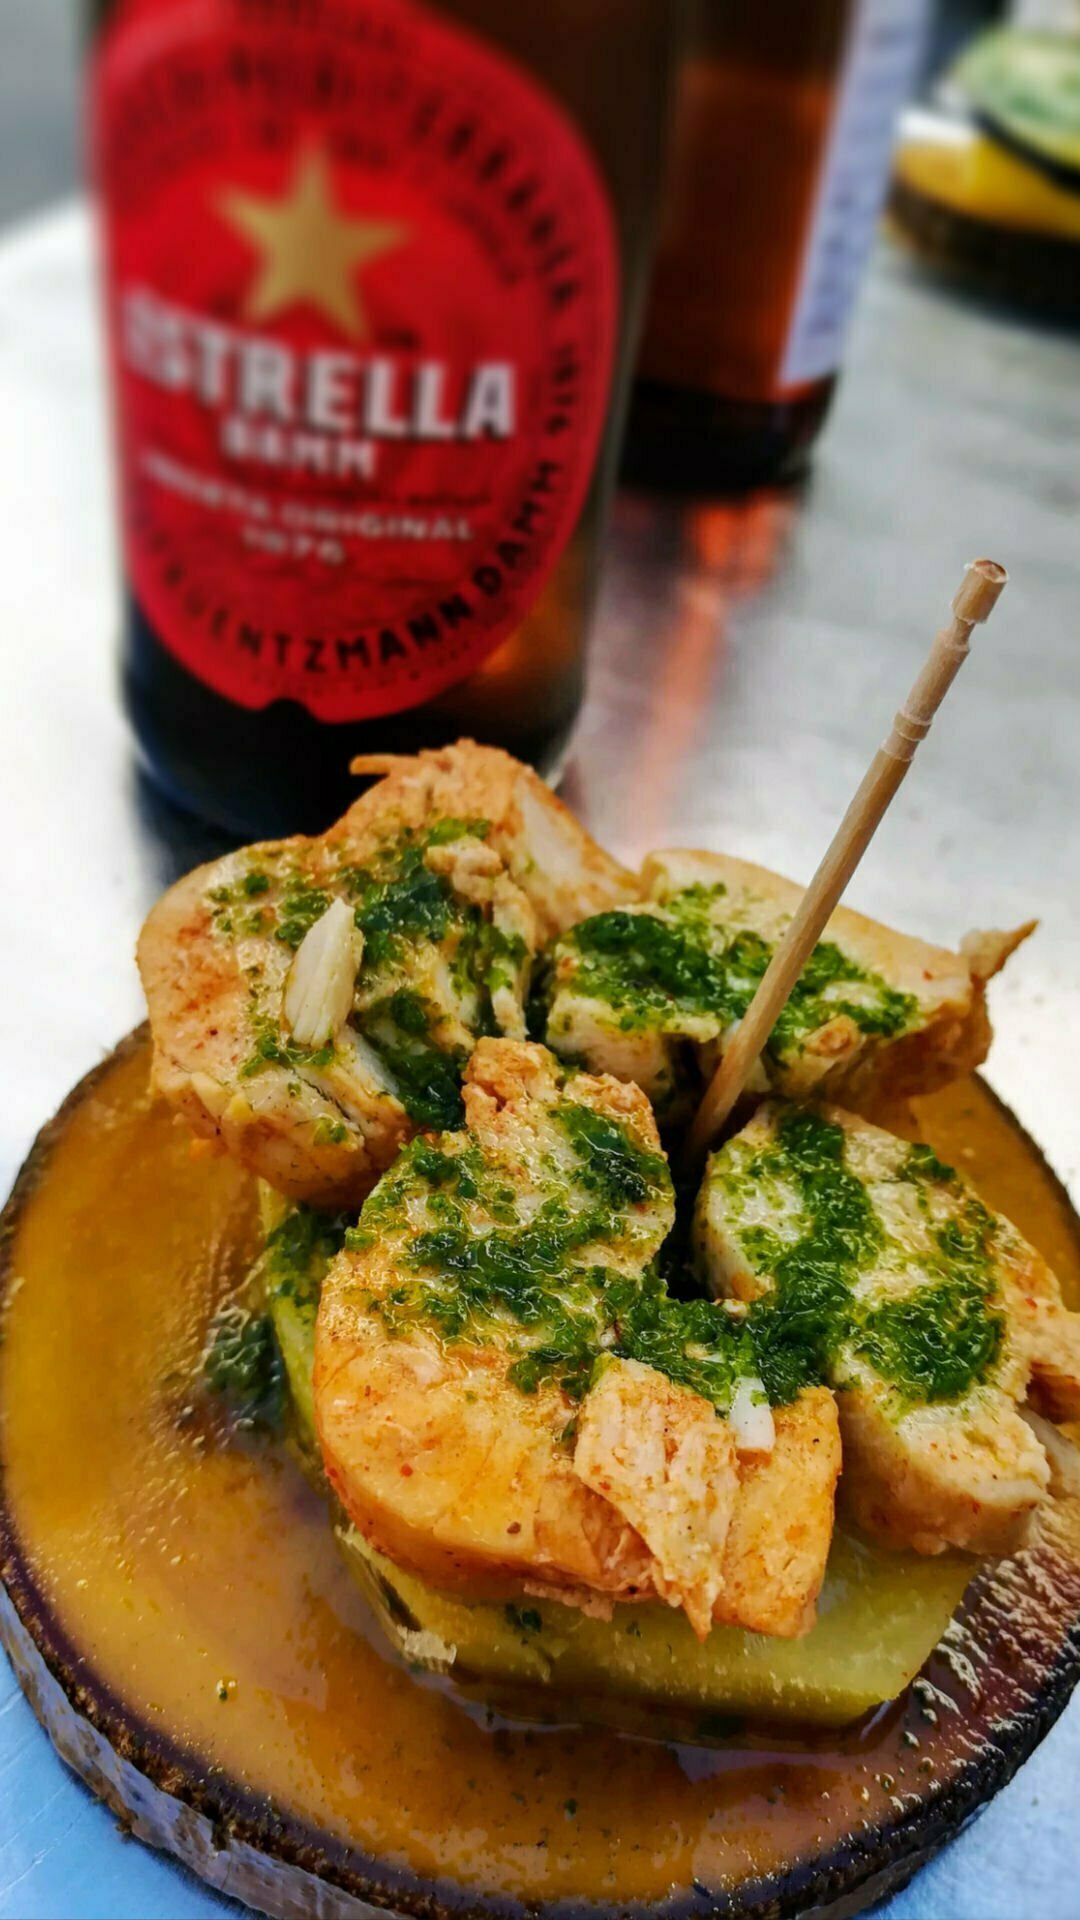  aplate of fried fish with a green sauce sits beside a bottle of beer